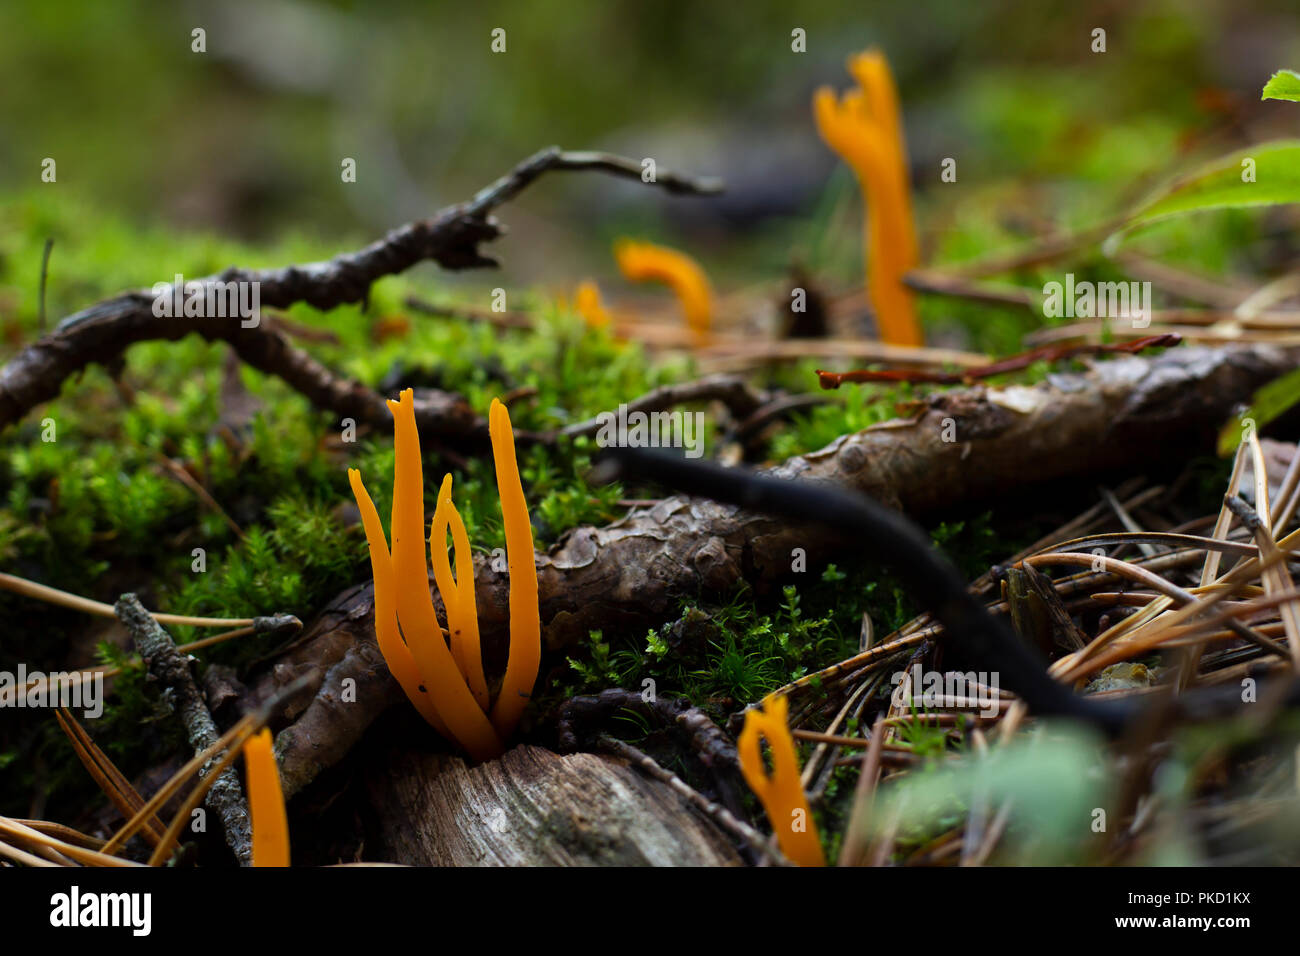 Close-up of yellow mushrooms among branches and green moss. Stock Photo